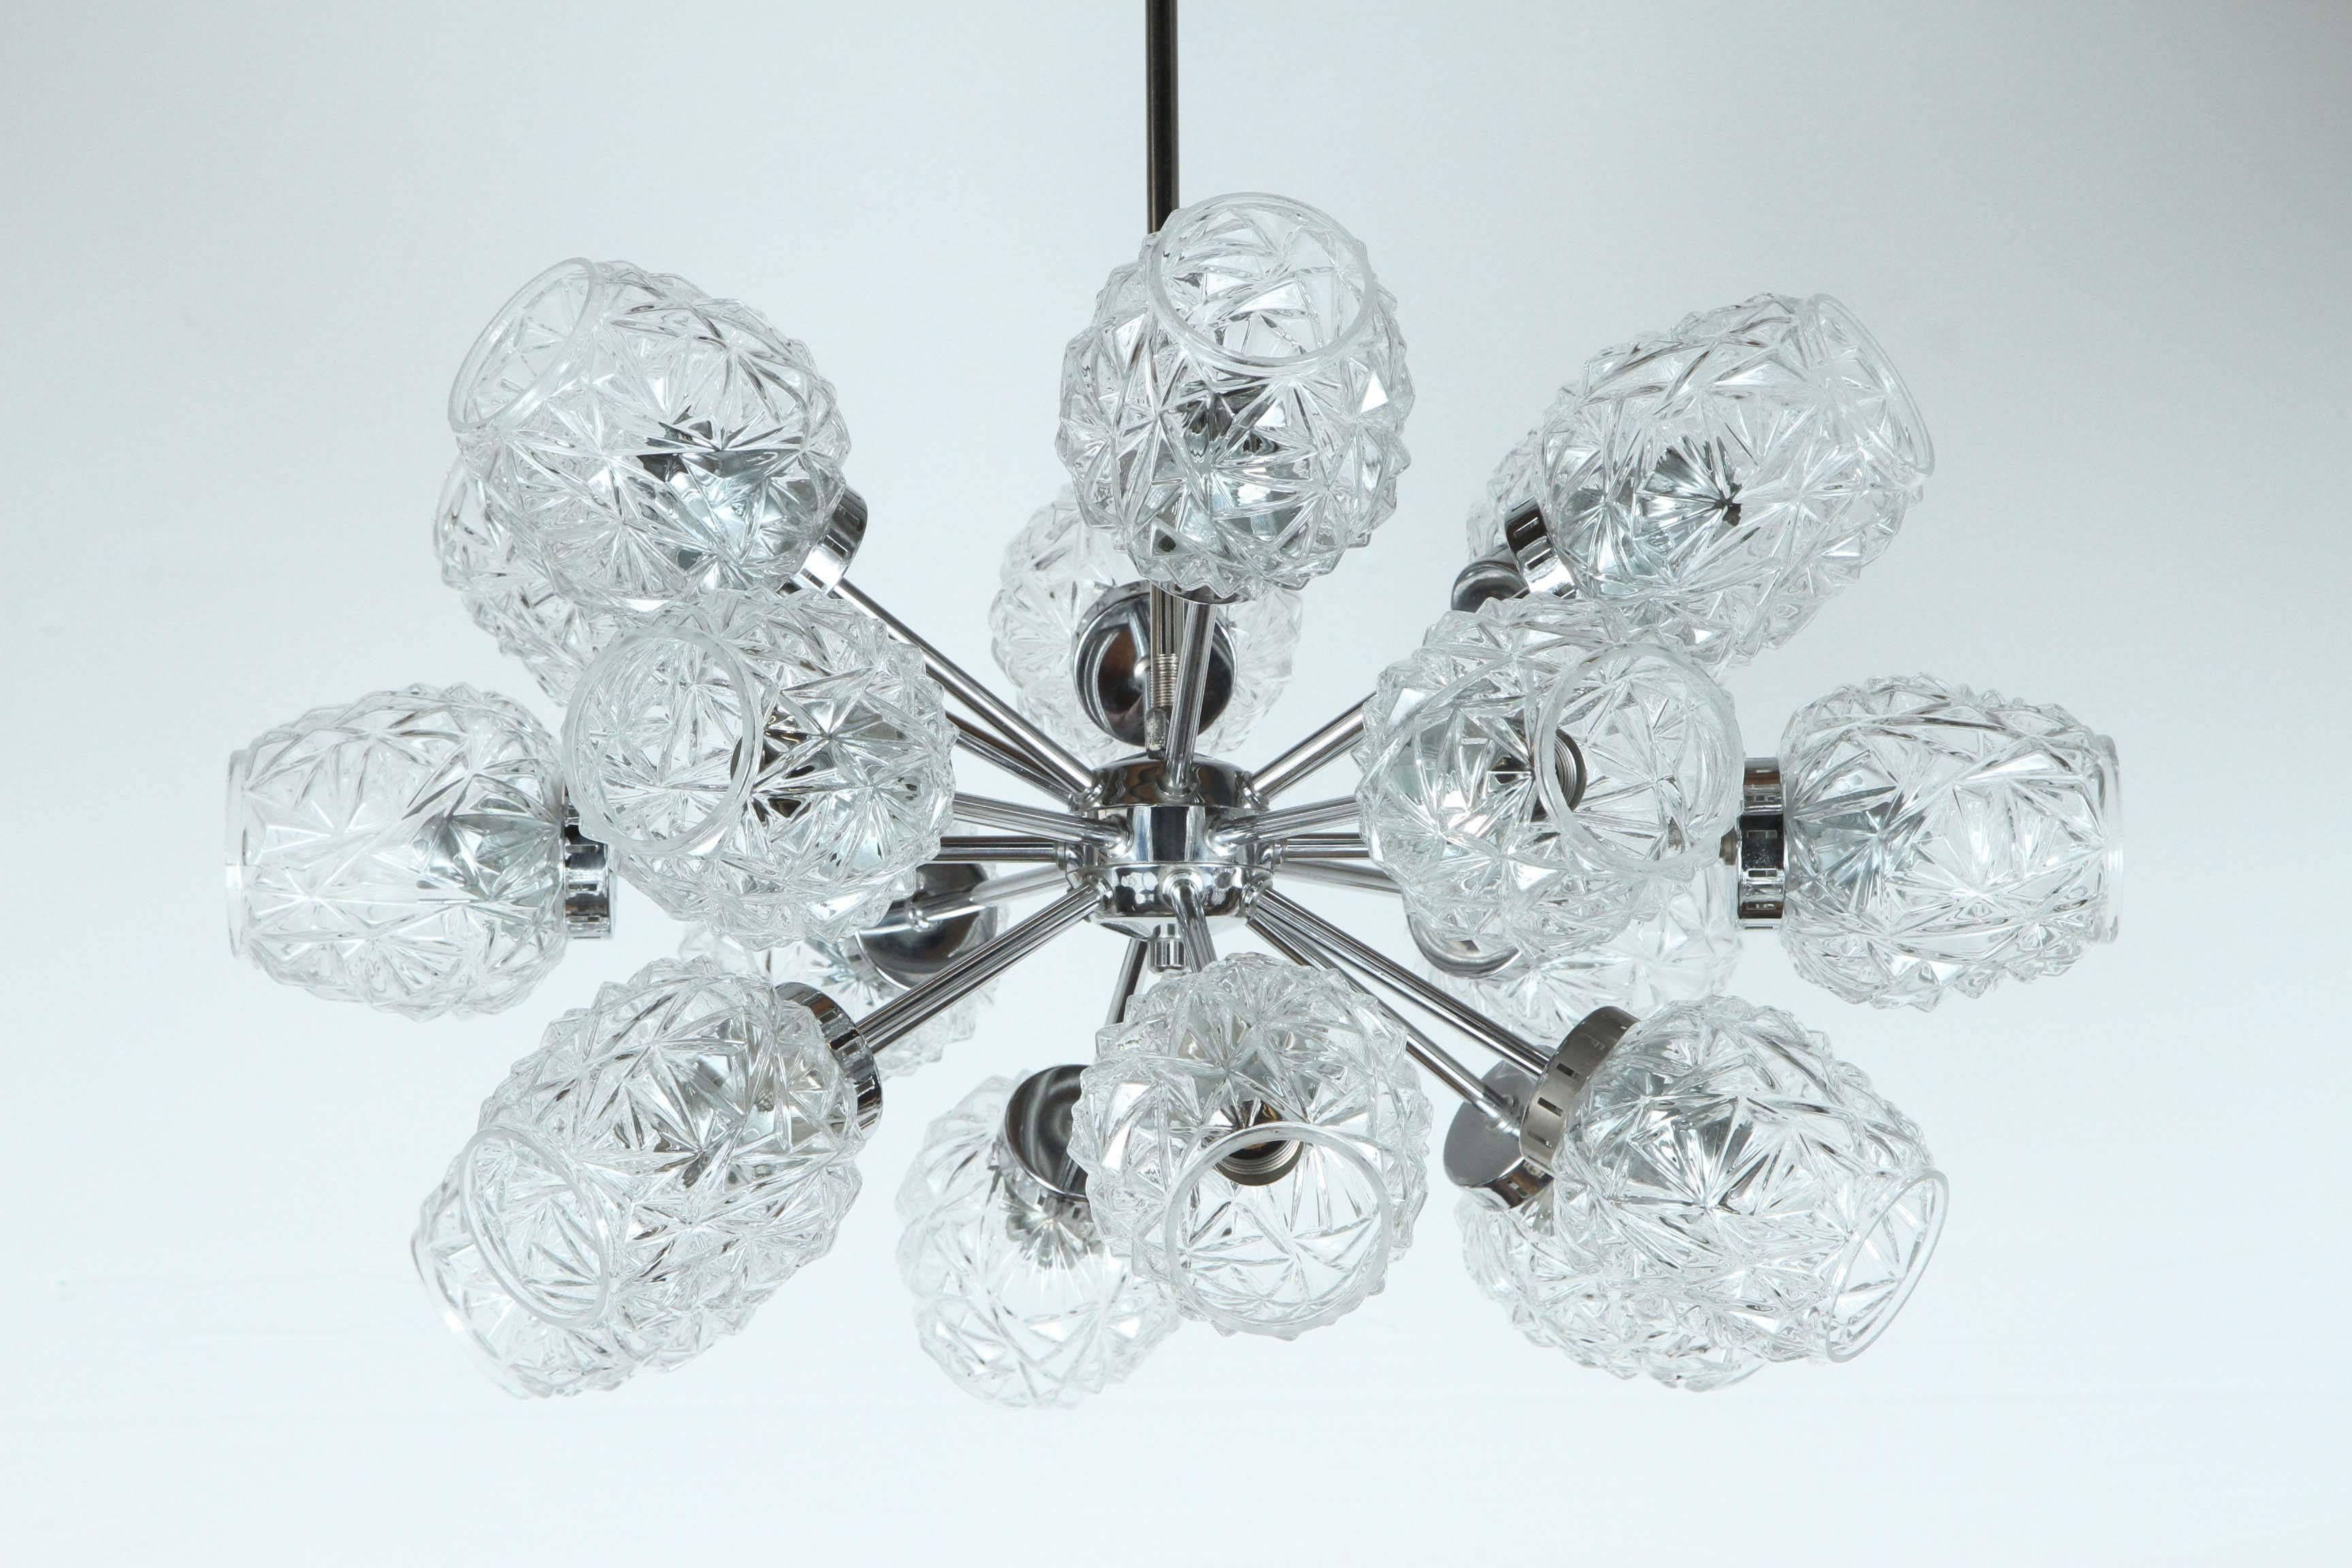 Unusual German Sputnik chandelier with cut glass elements.
The eighteen-arm polished chrome frame which has been newly rewired for the US takes candelabra light bulbs each with a 15 Watt maximum comes complete with a chrome rod and ceiling canopy.